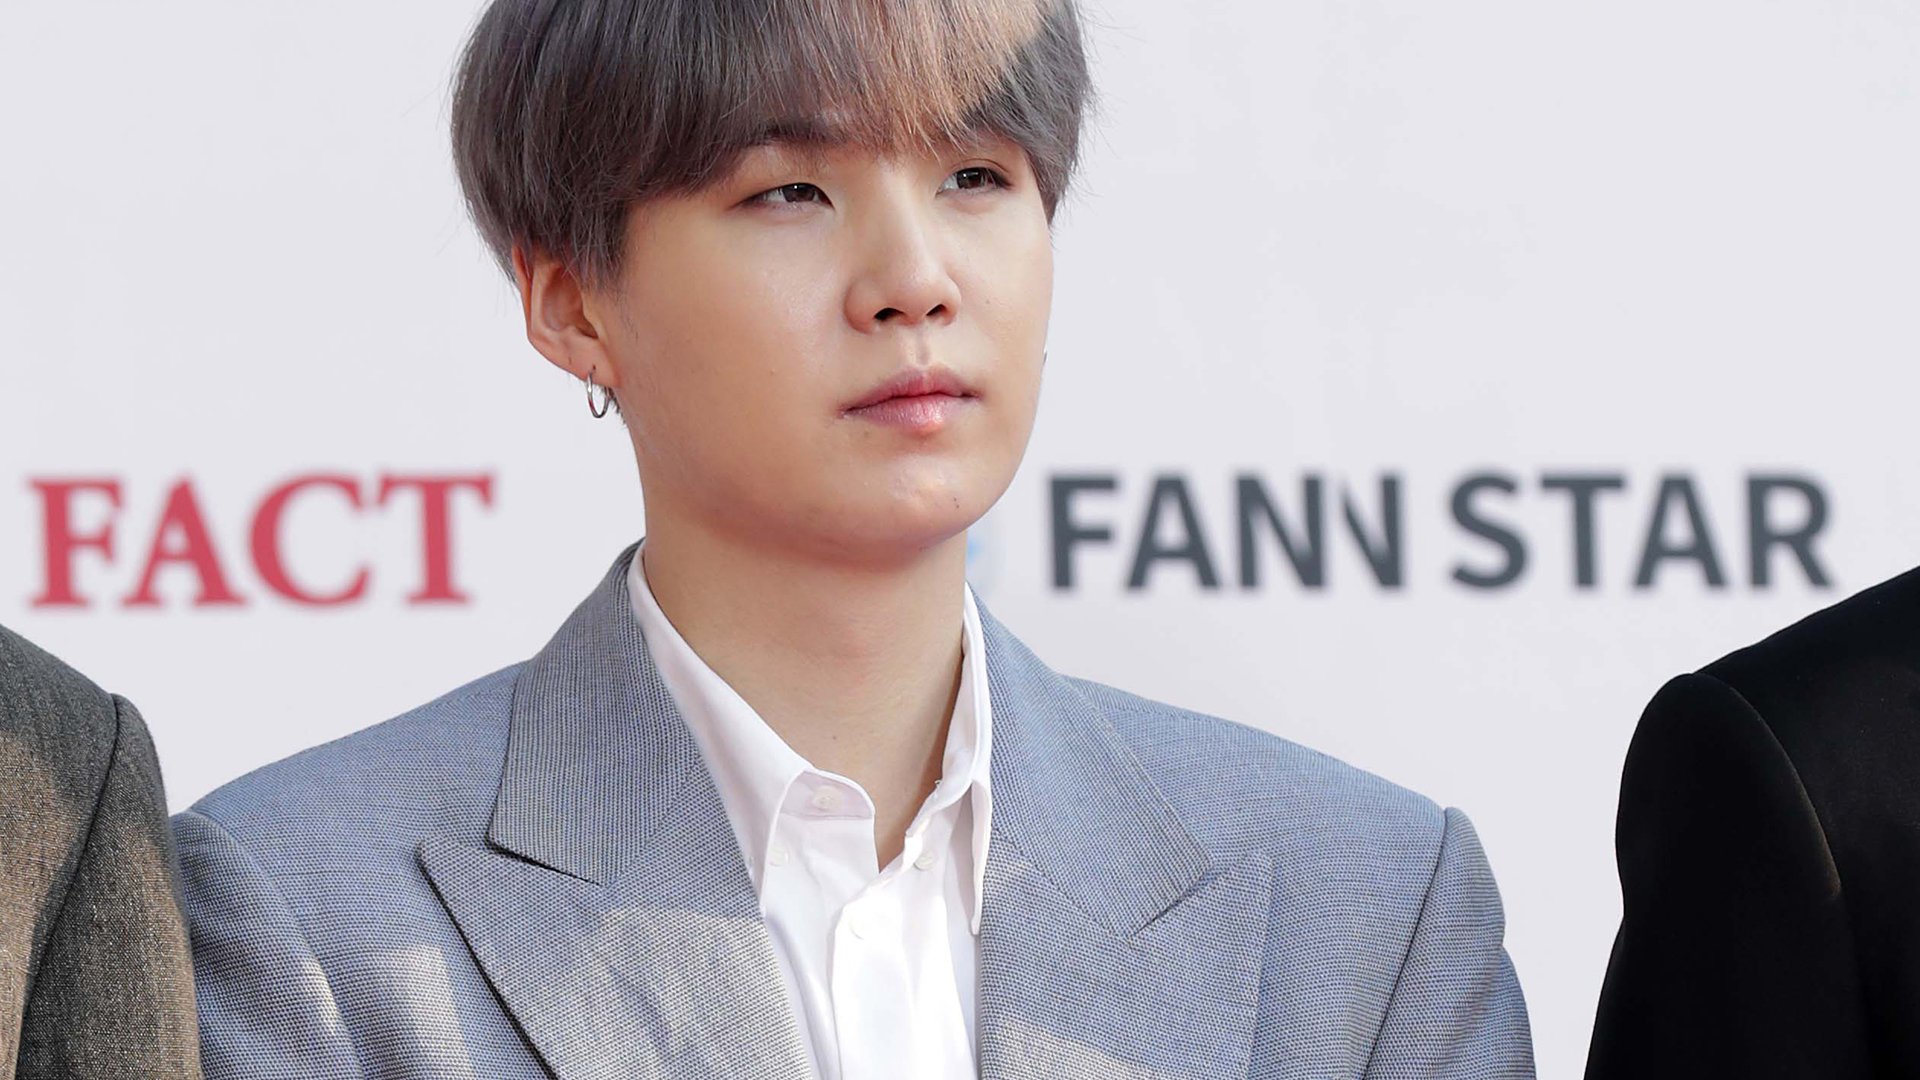 BTS: Suga's MAMA 2019 Speech for Artist of the Year Will Make You Cry